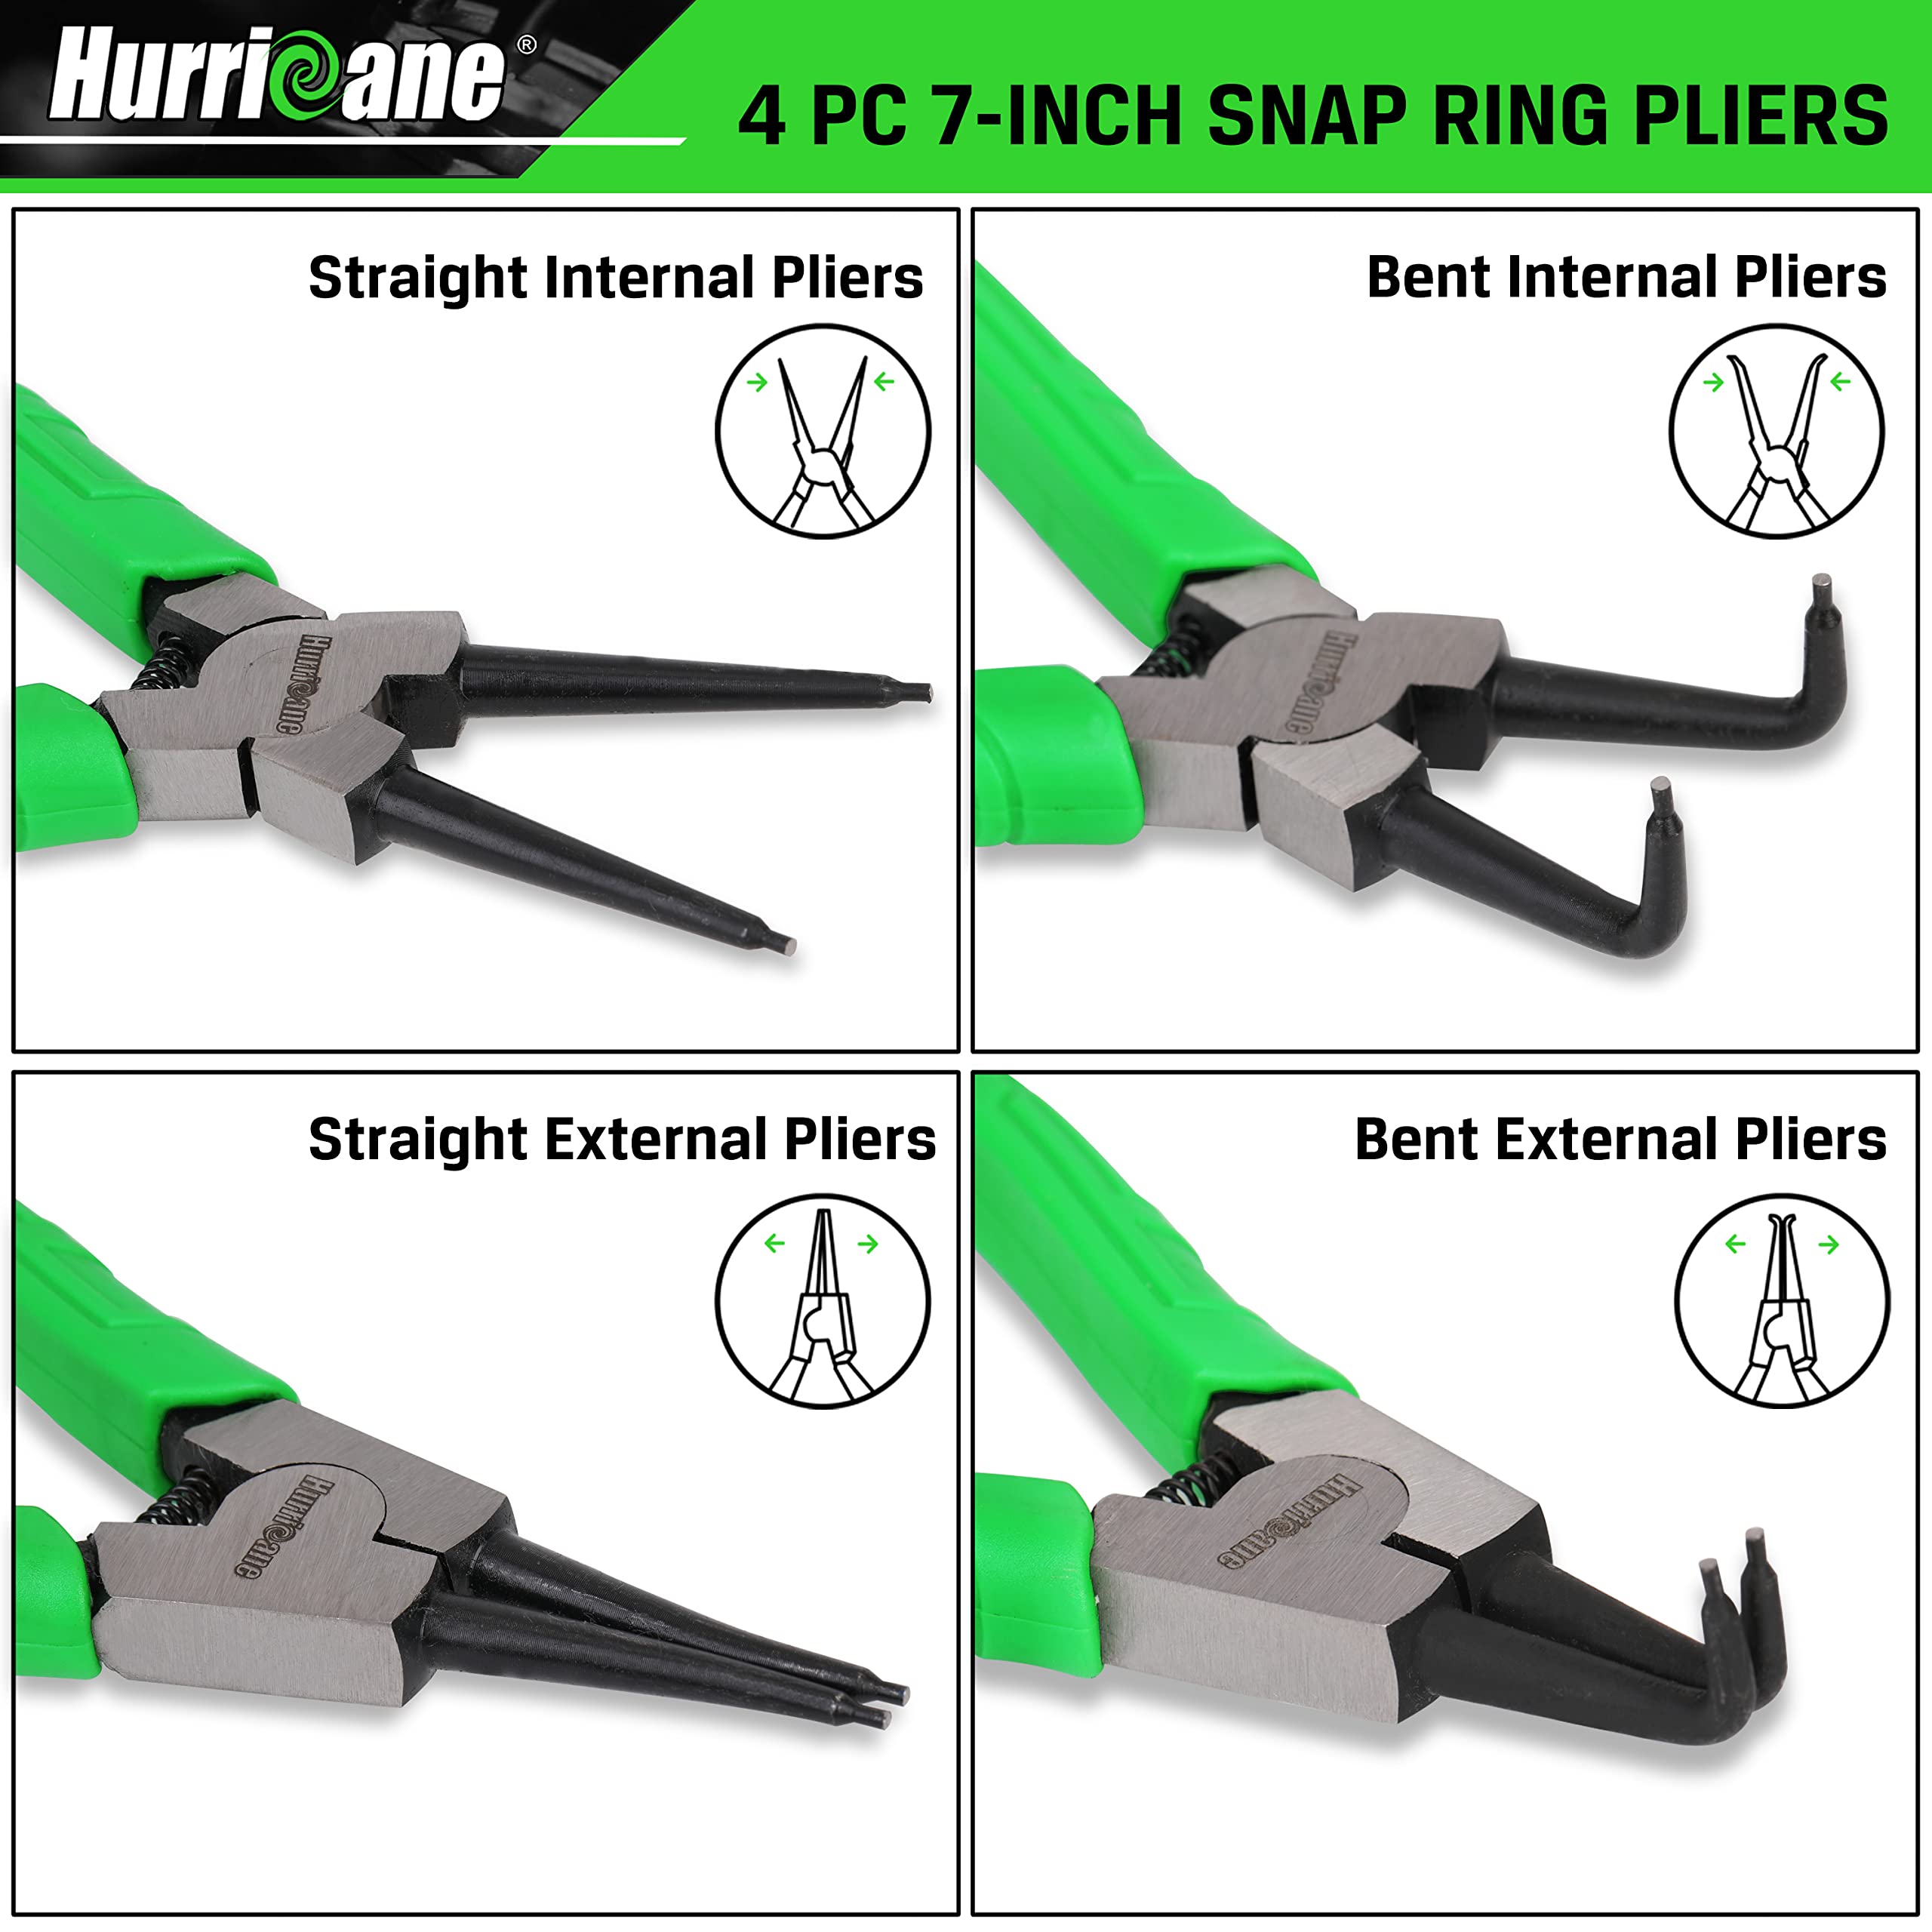 HURRICANE 4 Pieces Snap Ring Pliers Set, 7 Inch Internal & External Circlip Pliers Kit, CR-V Straight & Bent Jaw Pliers, Ideal for Ring Remover Retaining and Remove Hoses, with Portable Storage Pouch